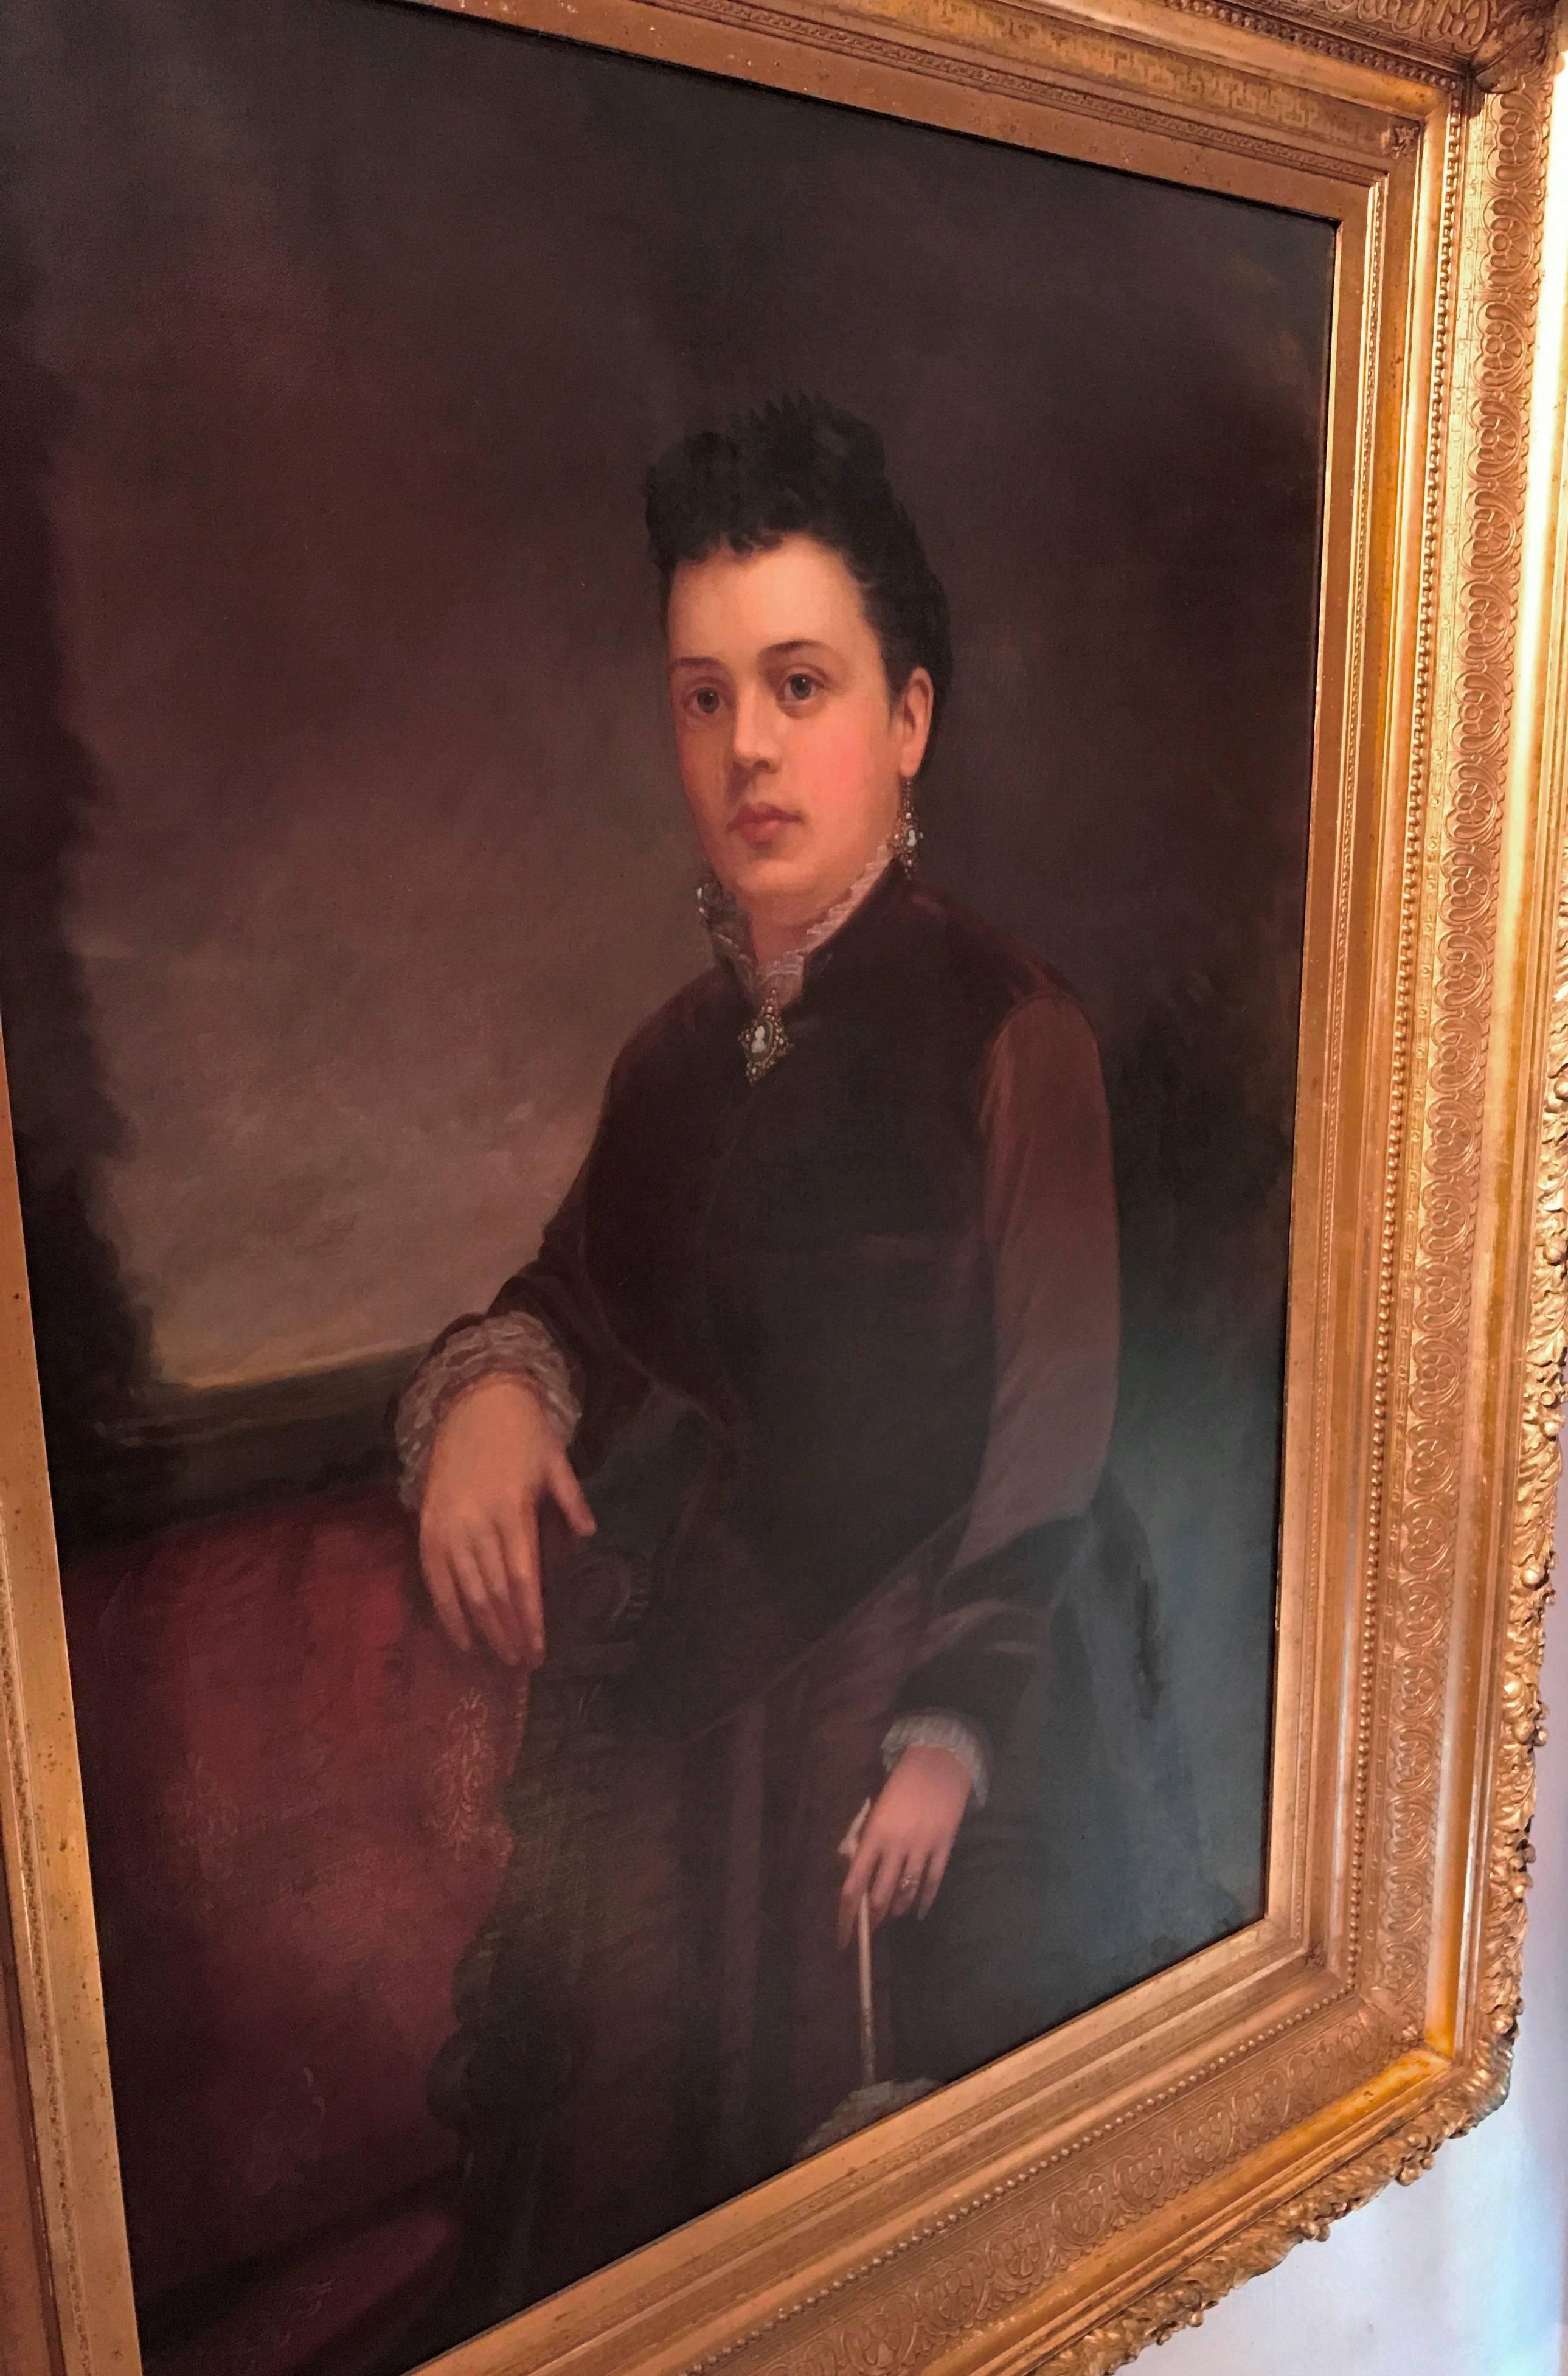 Original oil painting on canvas of a Victorian California socialite standing next to settee wearing period jewelry.

Artist signed William Cogswell and dated 1877. Painted during his time in San Francisco, Los Angeles, and Pasadena. He painted many